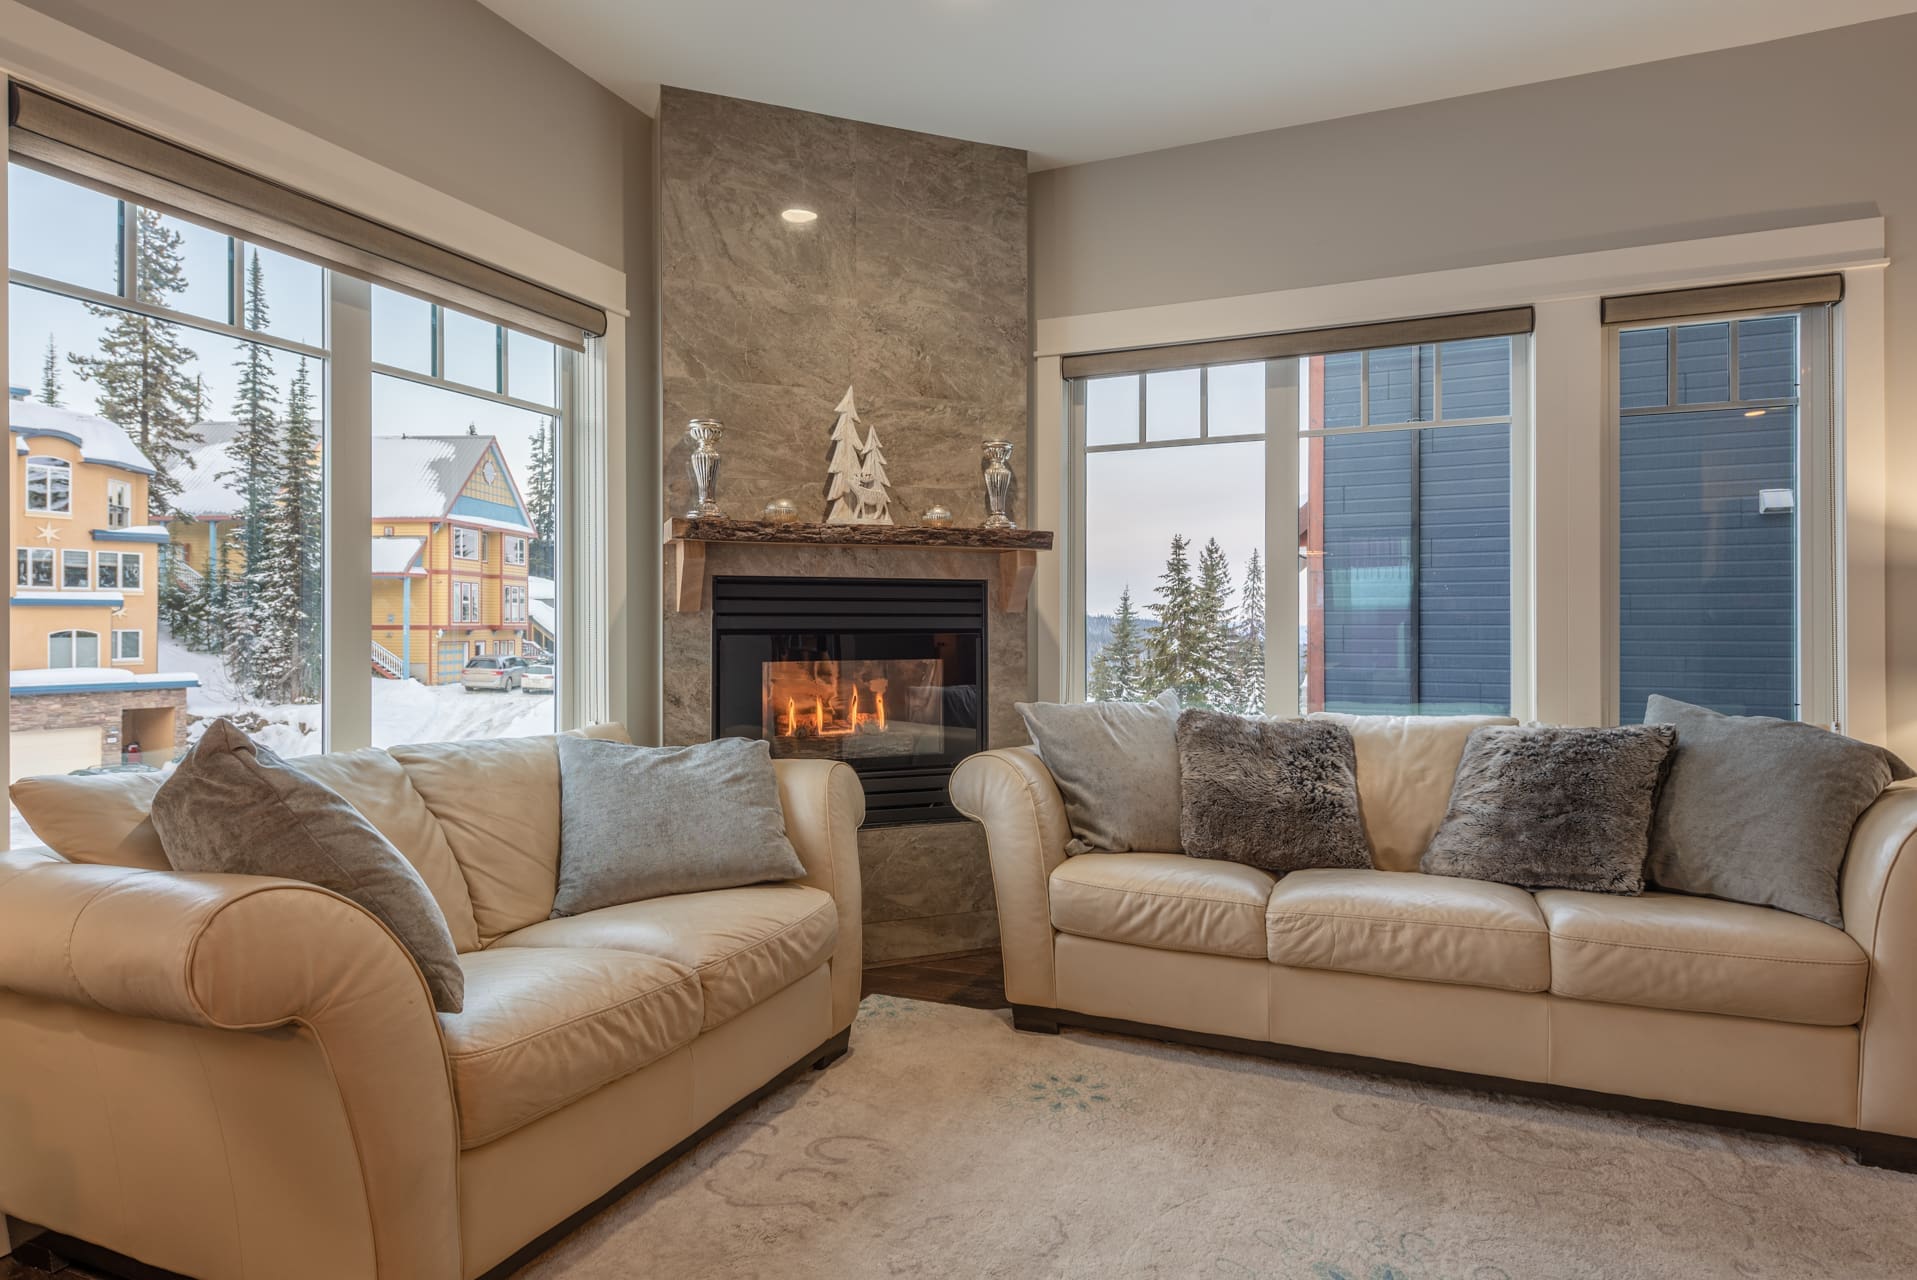 Upper living room of home with bright open windows, fully re-done inside with no expense spared. Gas fireplace, large dining table and area for family and friends to spread out. Private mudroom for storage and gear, private laundry and semi-private hot tub. Pet-friendly too!